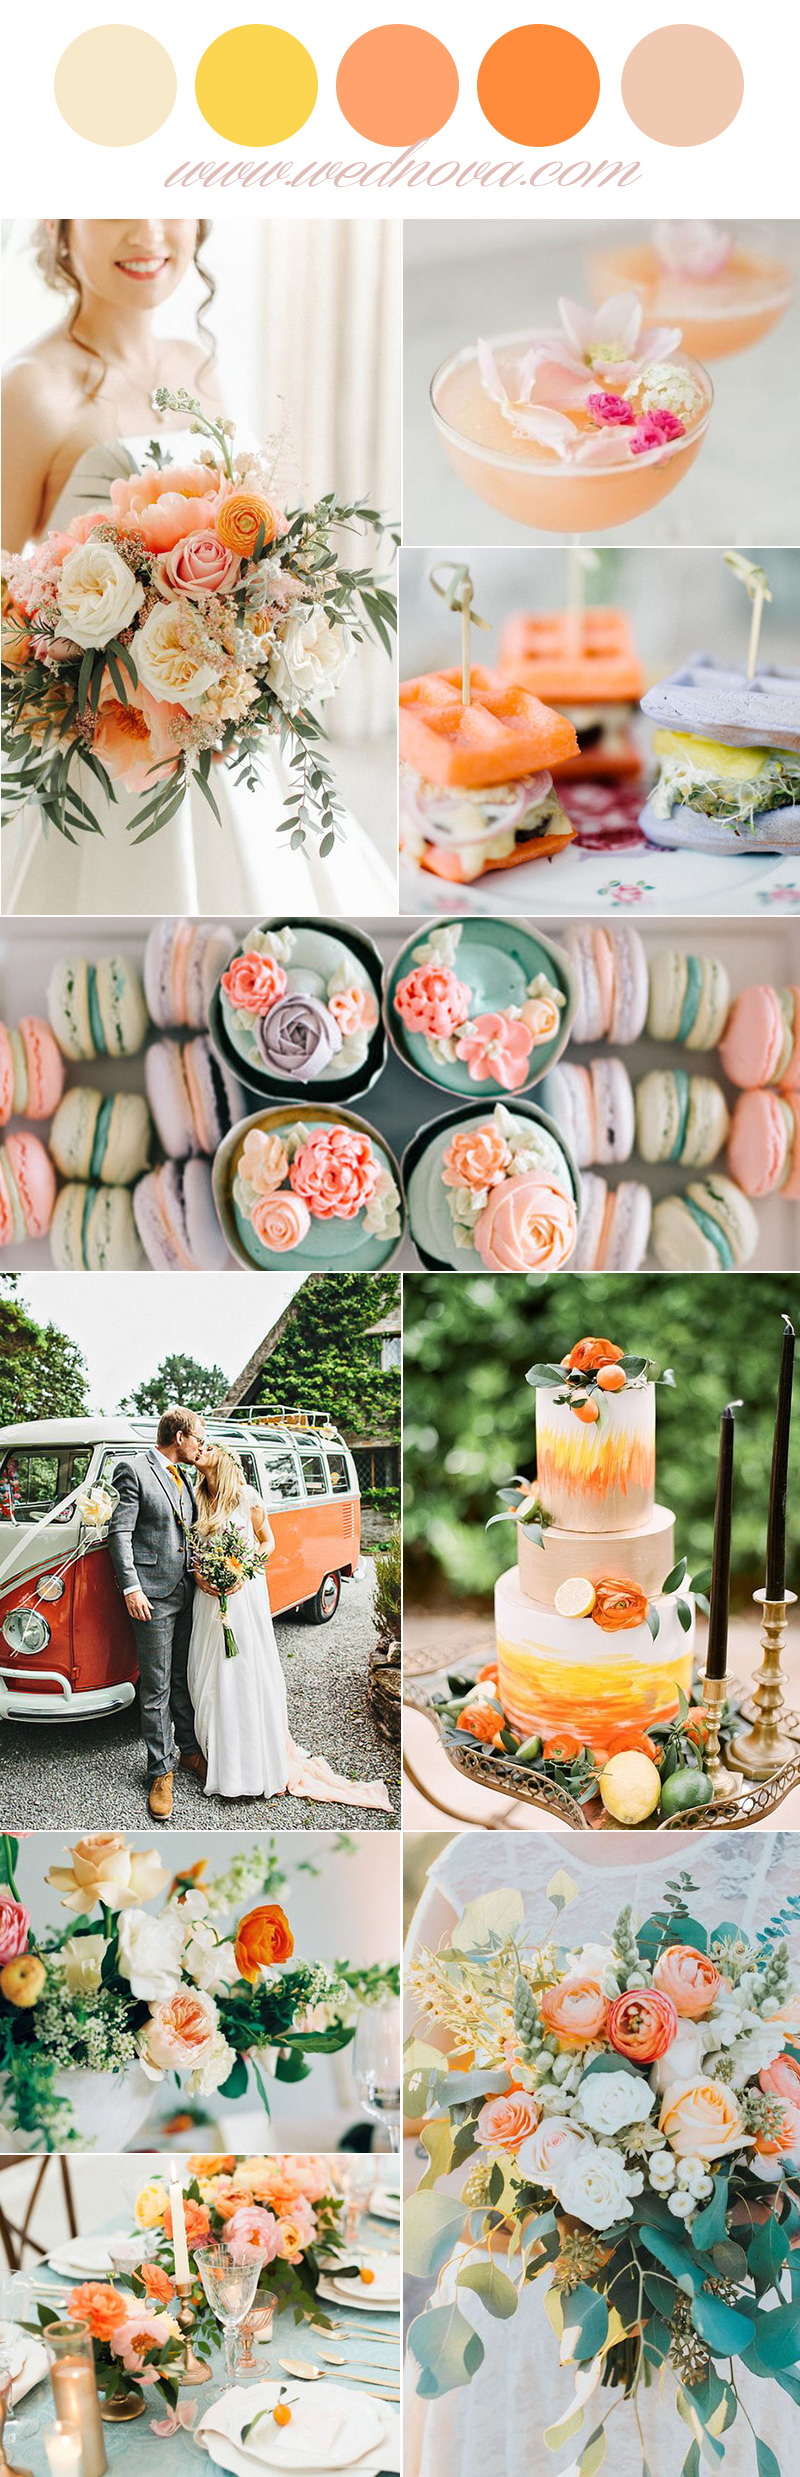 12 Wedding Color Palettes That Are Perfect for Spring - WedNova Blog